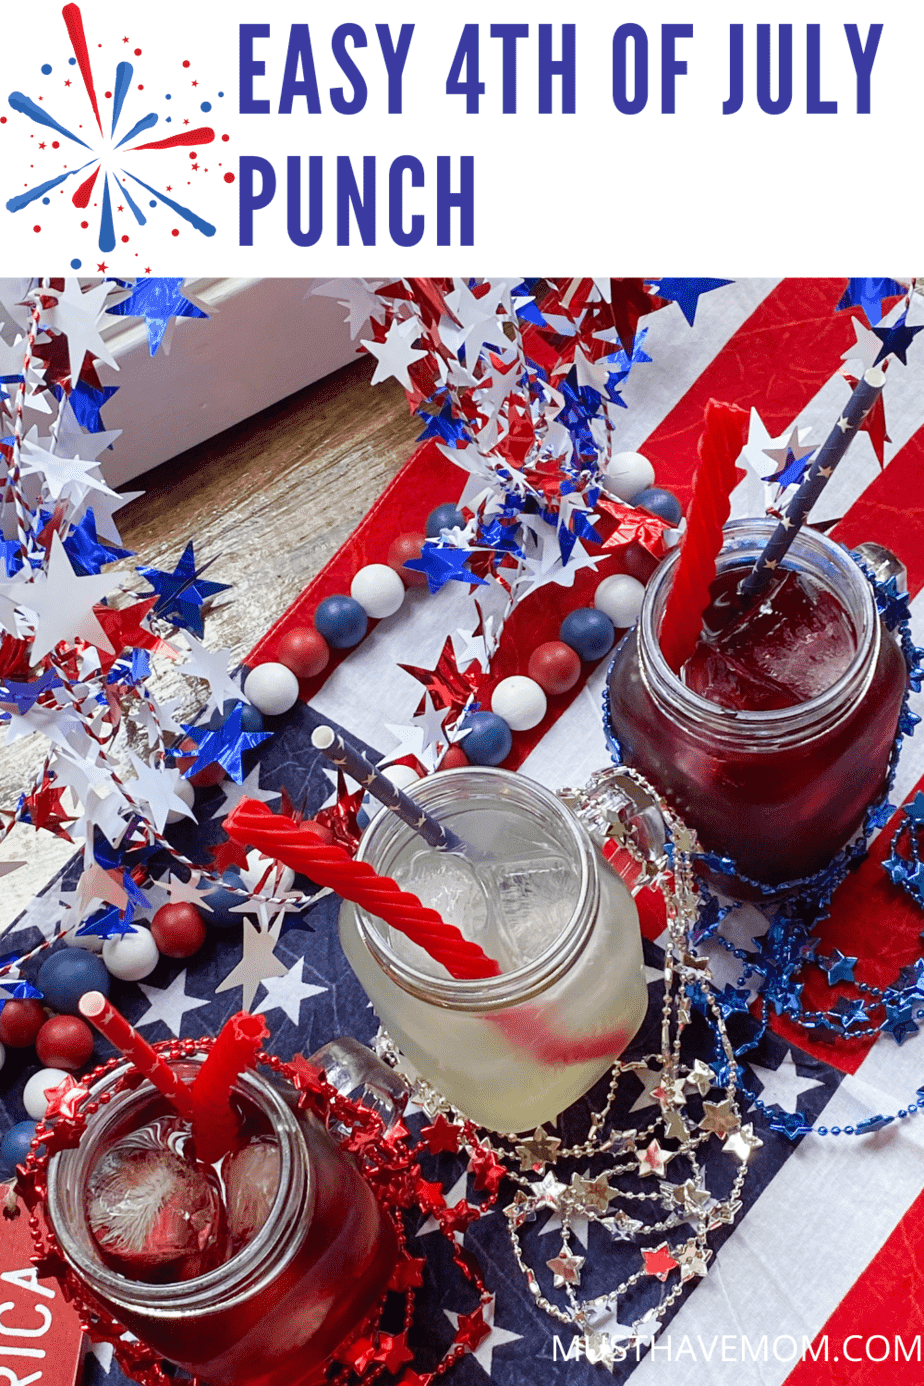 Easy 4th of July Punch. This easy 4th of July punch recipe is perfect for a 4th of July celebration. Using real fruit and fruit juice you have the perfect punch recipe. #musthavemom #recipe #punch #4thofJuly #fruitpunch #recipe